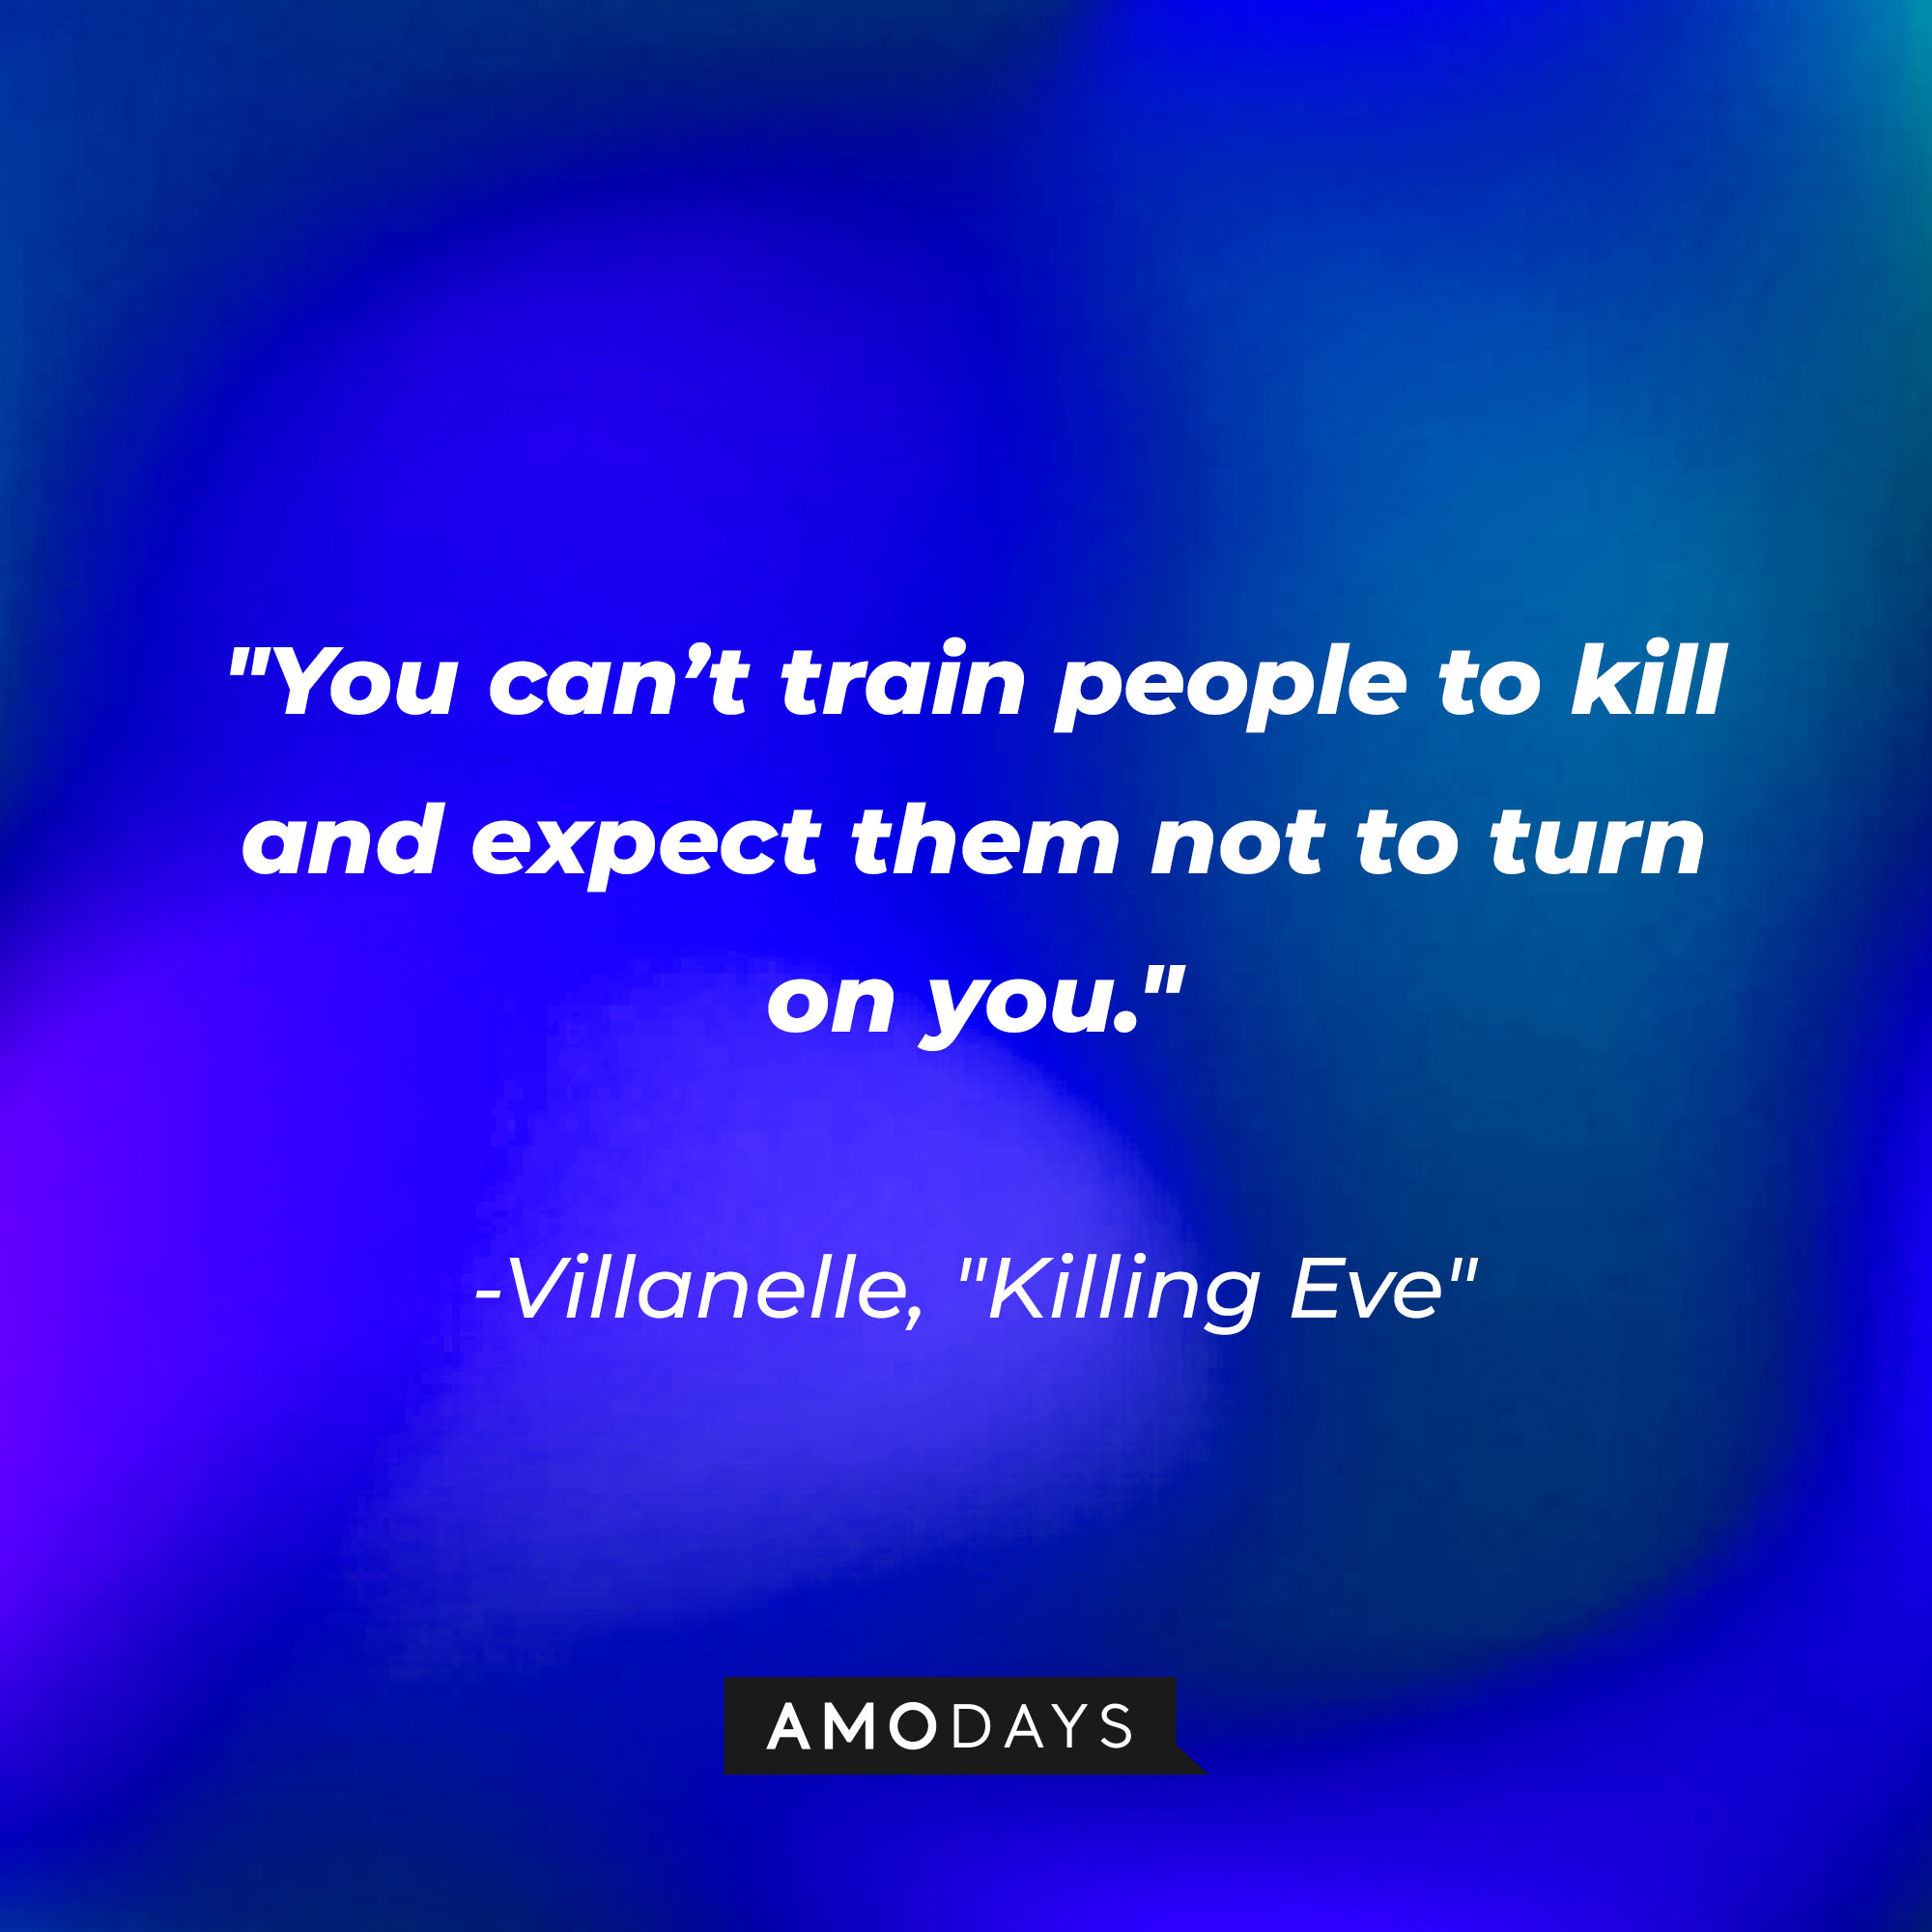 Villanelle's quote: "You can’t train people to kill and expect them not to turn on you." | Source: Amodays